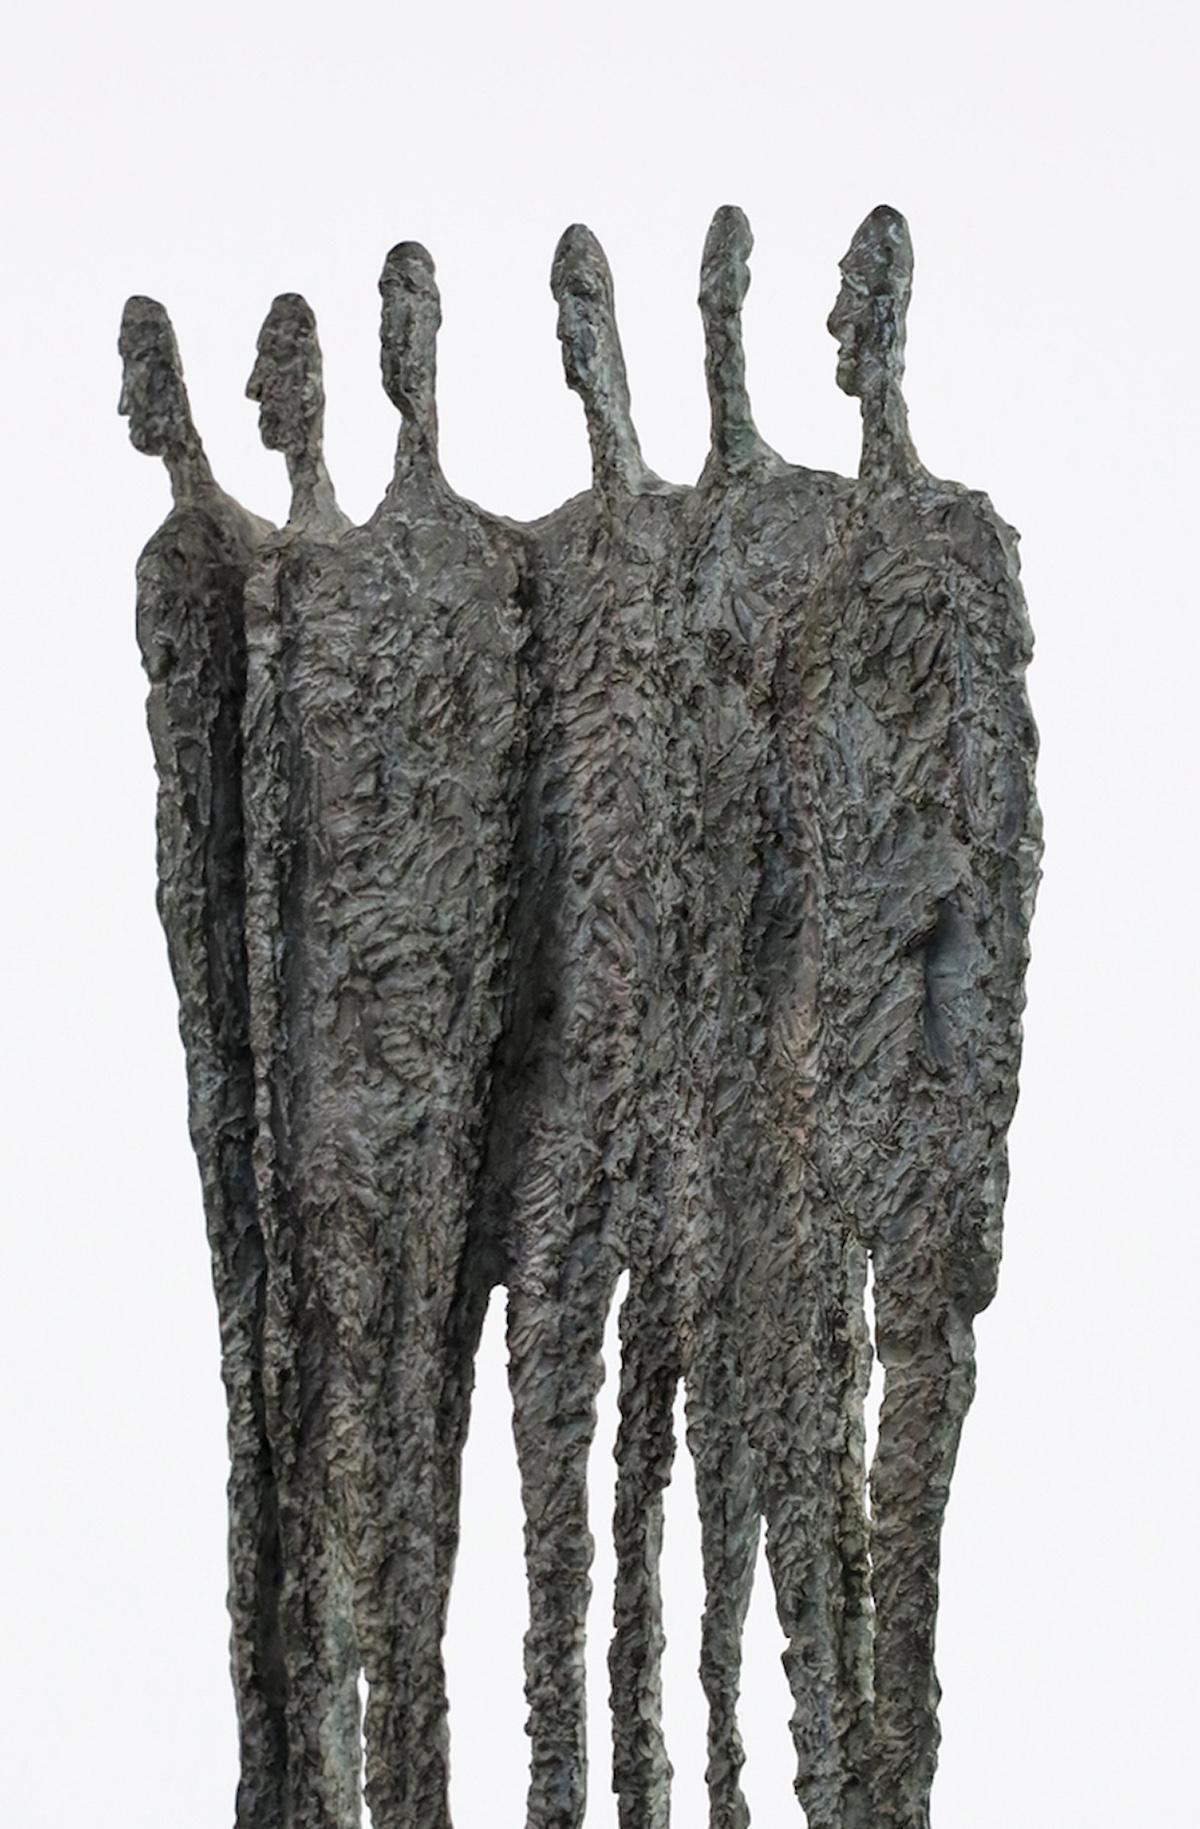 The Group by Martine Demal - bronze sculpture, group of human figures 3